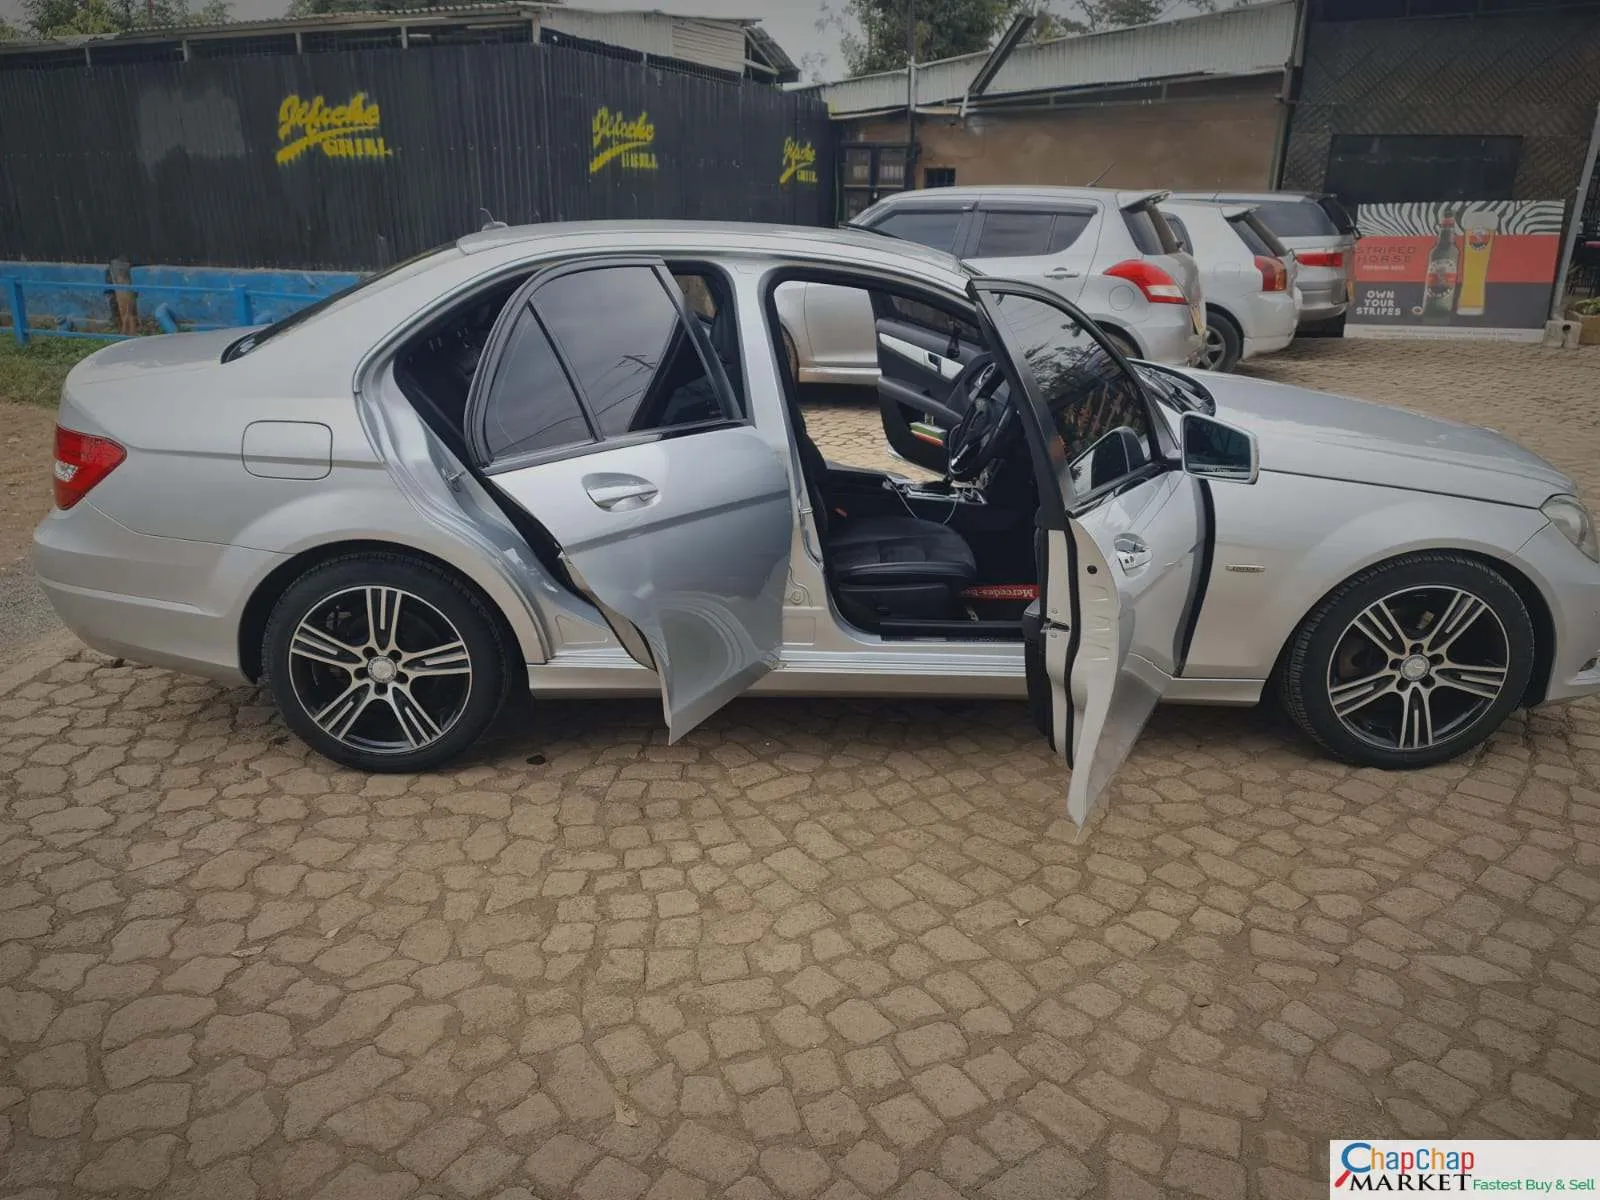 Cars Cars For Sale-Mercedes Benz C180 kenya 🔥 You Pay 30% DEPOSIT Trade in OK Mercedes Benz c180 for sale in kenya hire purchase installments EXCLUSIVE 5